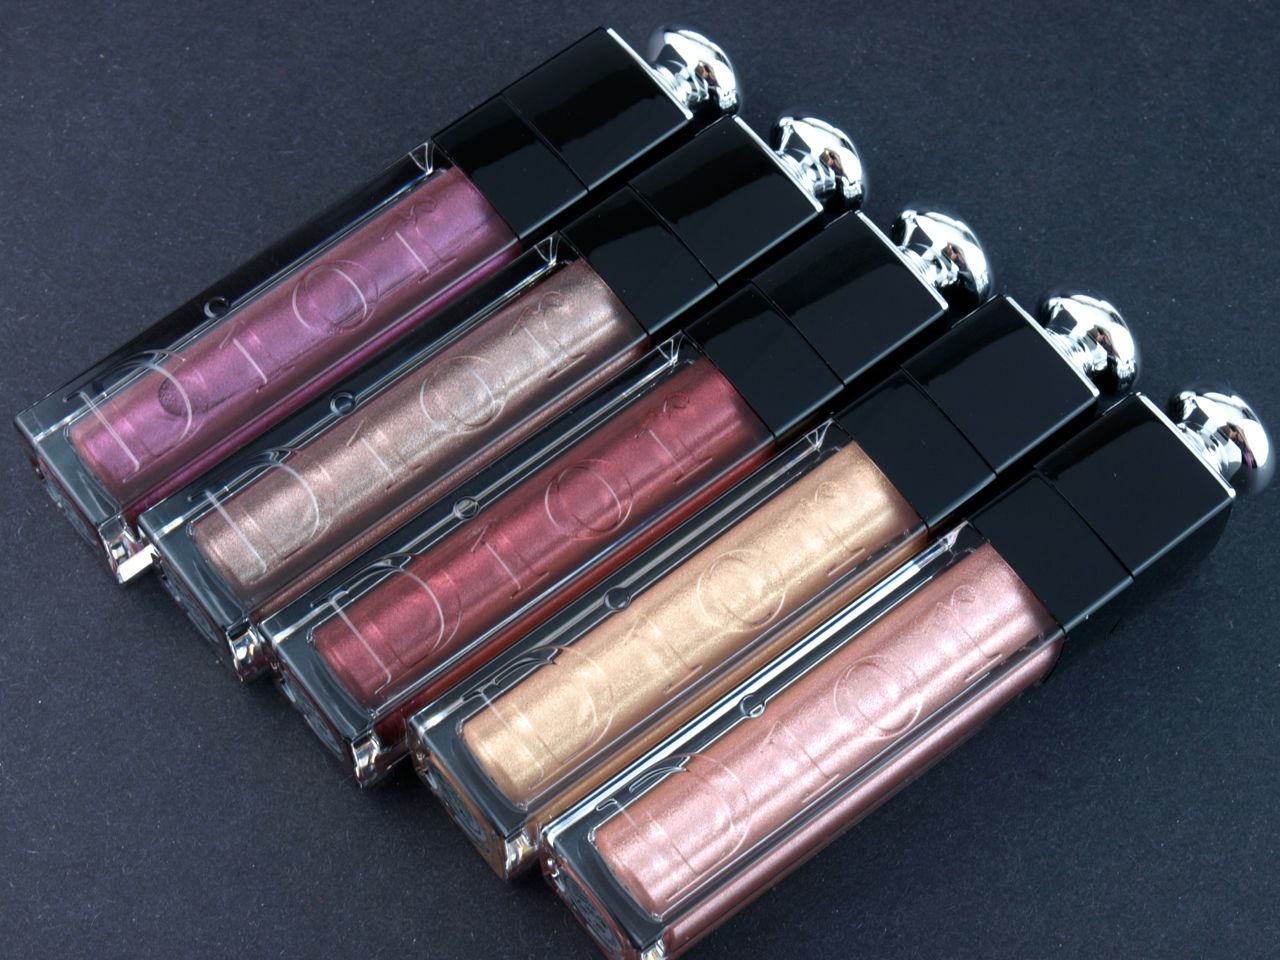 Dior Fall 2015 Dior Addict Fluid Shadow: Review and Swatches